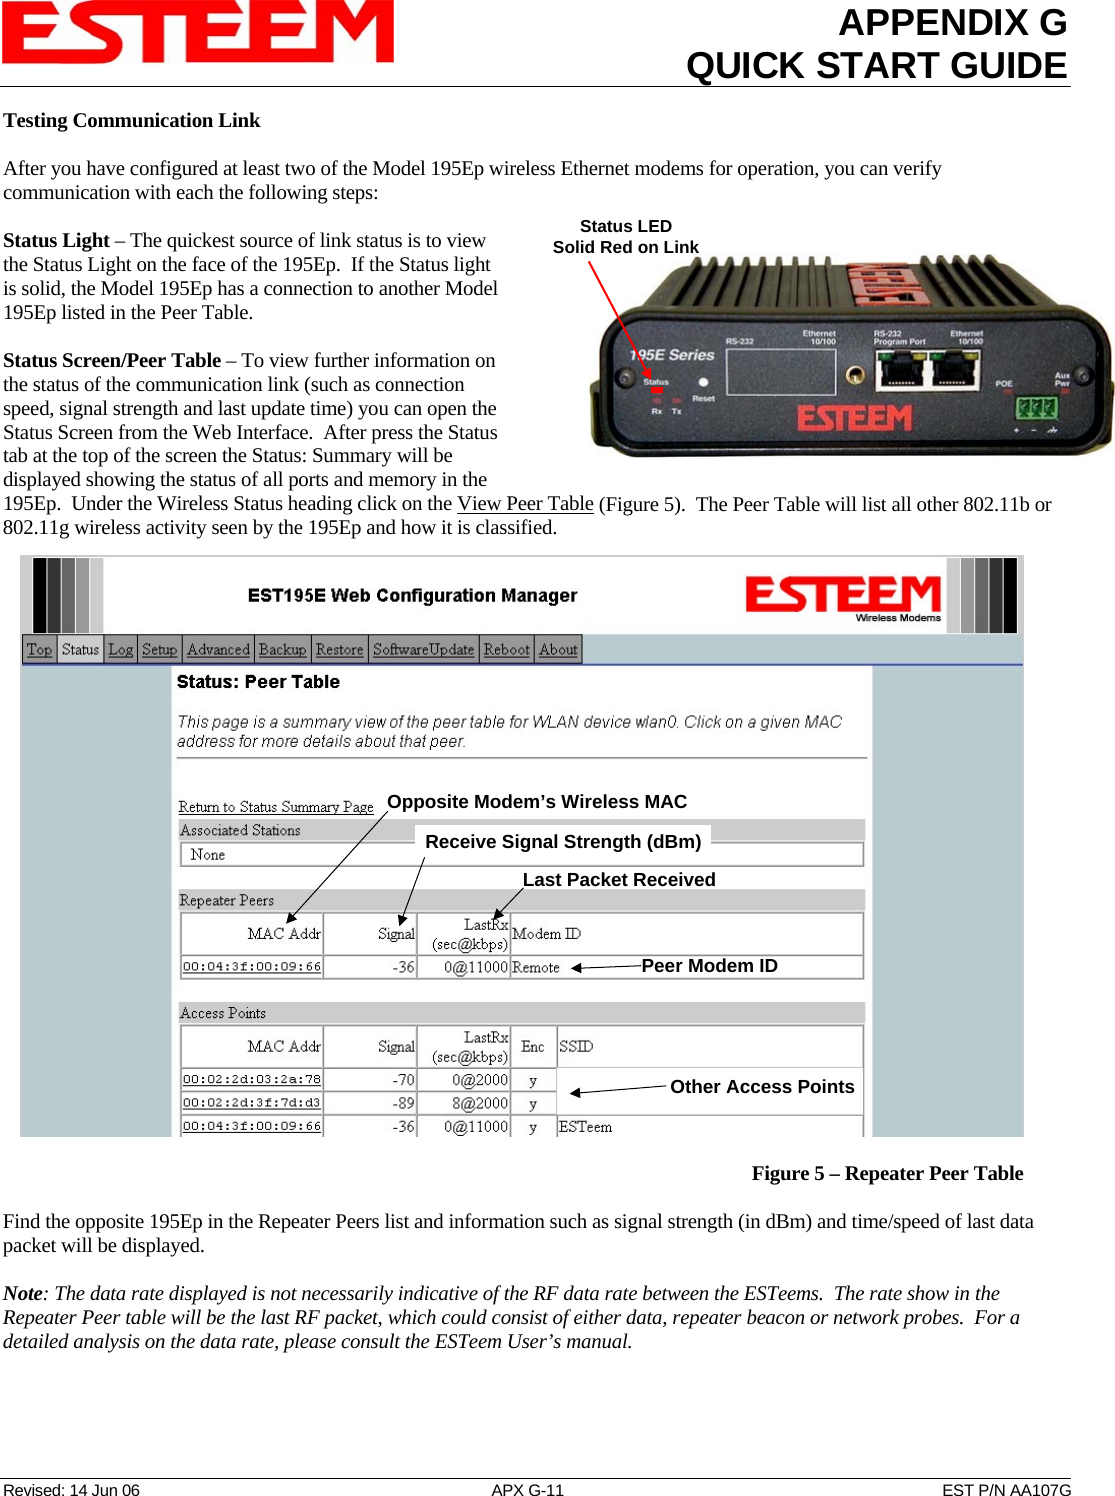 APPENDIX GQUICK START GUIDE  Revised: 14 Jun 06  APX G-11  EST P/N AA107G Testing Communication Link  After you have configured at least two of the Model 195Ep wireless Ethernet modems for operation, you can verify communication with each the following steps:  Status Light – The quickest source of link status is to view the Status Light on the face of the 195Ep.  If the Status light is solid, the Model 195Ep has a connection to another Model 195Ep listed in the Peer Table.  Status Screen/Peer Table – To view further information on the status of the communication link (such as connection speed, signal strength and last update time) you can open the Status Screen from the Web Interface.  After press the Status tab at the top of the screen the Status: Summary will be displayed showing the status of all ports and memory in the 195Ep.  Under the Wireless Status heading click on the View Peer Table (Figure 5).  The Peer Table will list all other 802.11b or 802.11g wireless activity seen by the 195Ep and how it is classified.    Find the opposite 195Ep in the Repeater Peers list and information such as signal strength (in dBm) and time/speed of last data packet will be displayed.  Note: The data rate displayed is not necessarily indicative of the RF data rate between the ESTeems.  The rate show in the Repeater Peer table will be the last RF packet, which could consist of either data, repeater beacon or network probes.  For a detailed analysis on the data rate, please consult the ESTeem User’s manual.  Status LEDSolid Red on Link  Opposite Modem’s Wireless MACReceive Signal Strength (dBm)Last Packet ReceivedPeer Modem IDOther Access Points  Figure 5 – Repeater Peer Table 